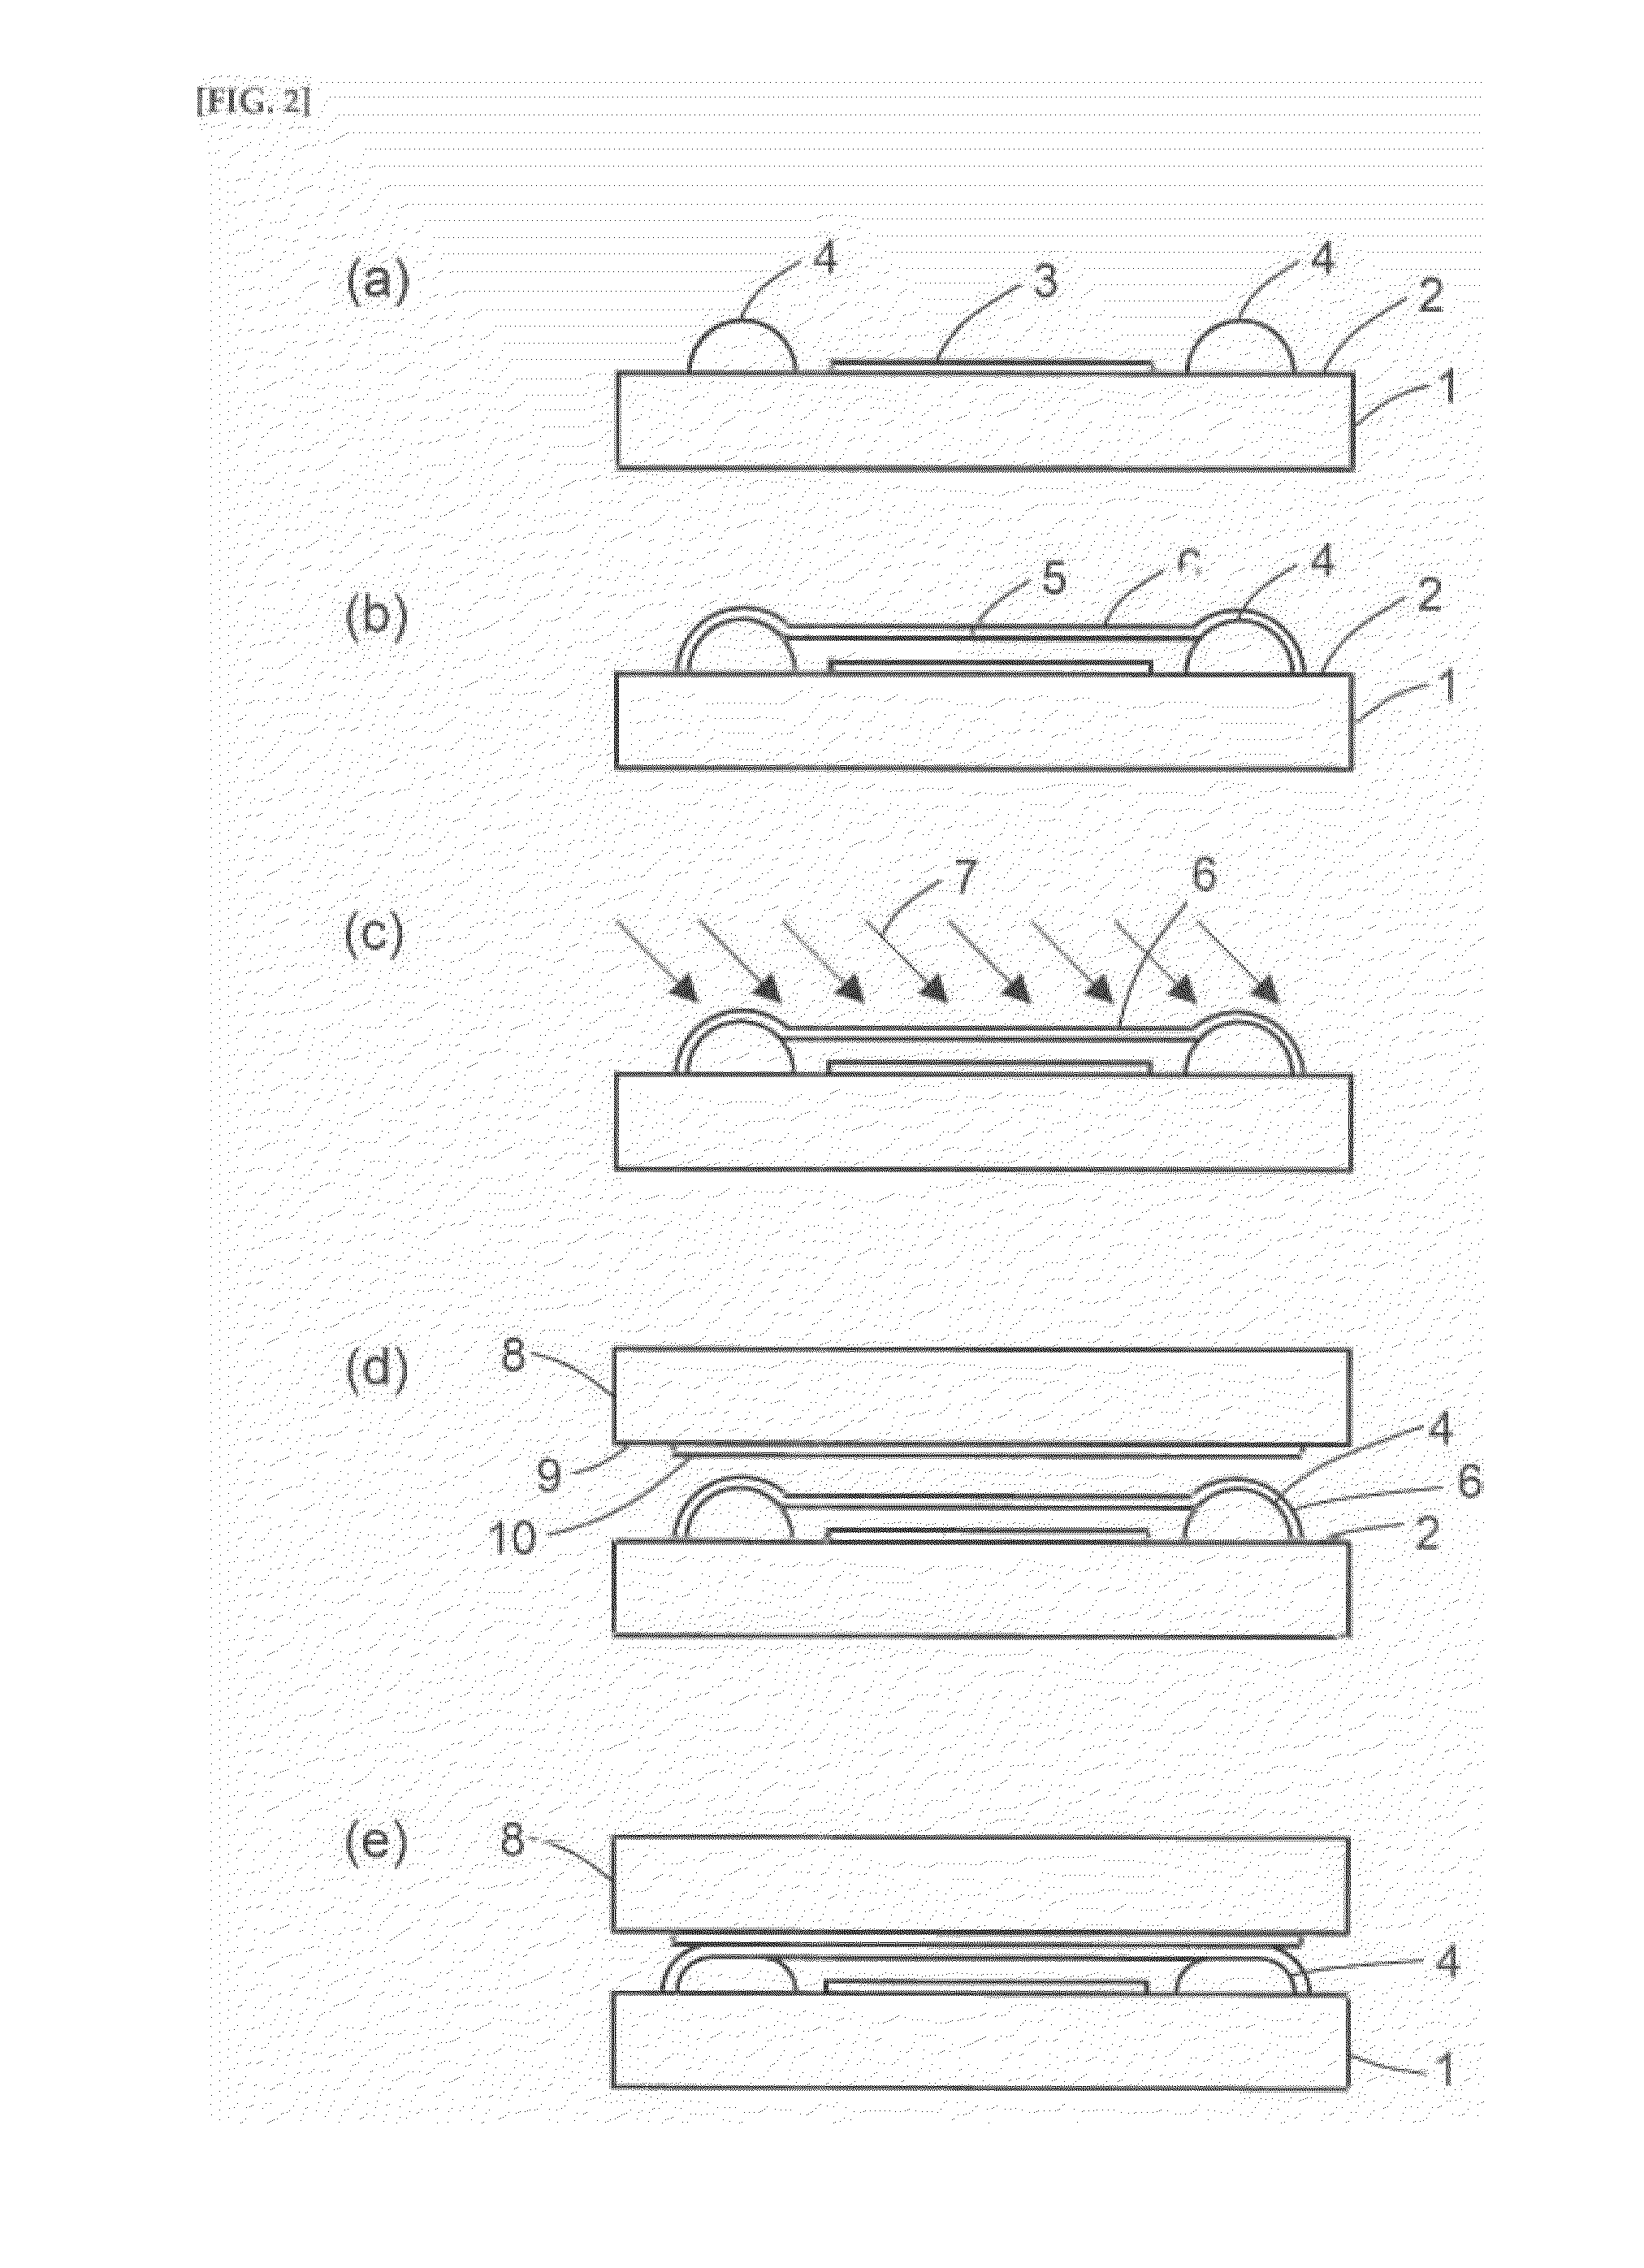 Electronic element sealing method and bonded substrate